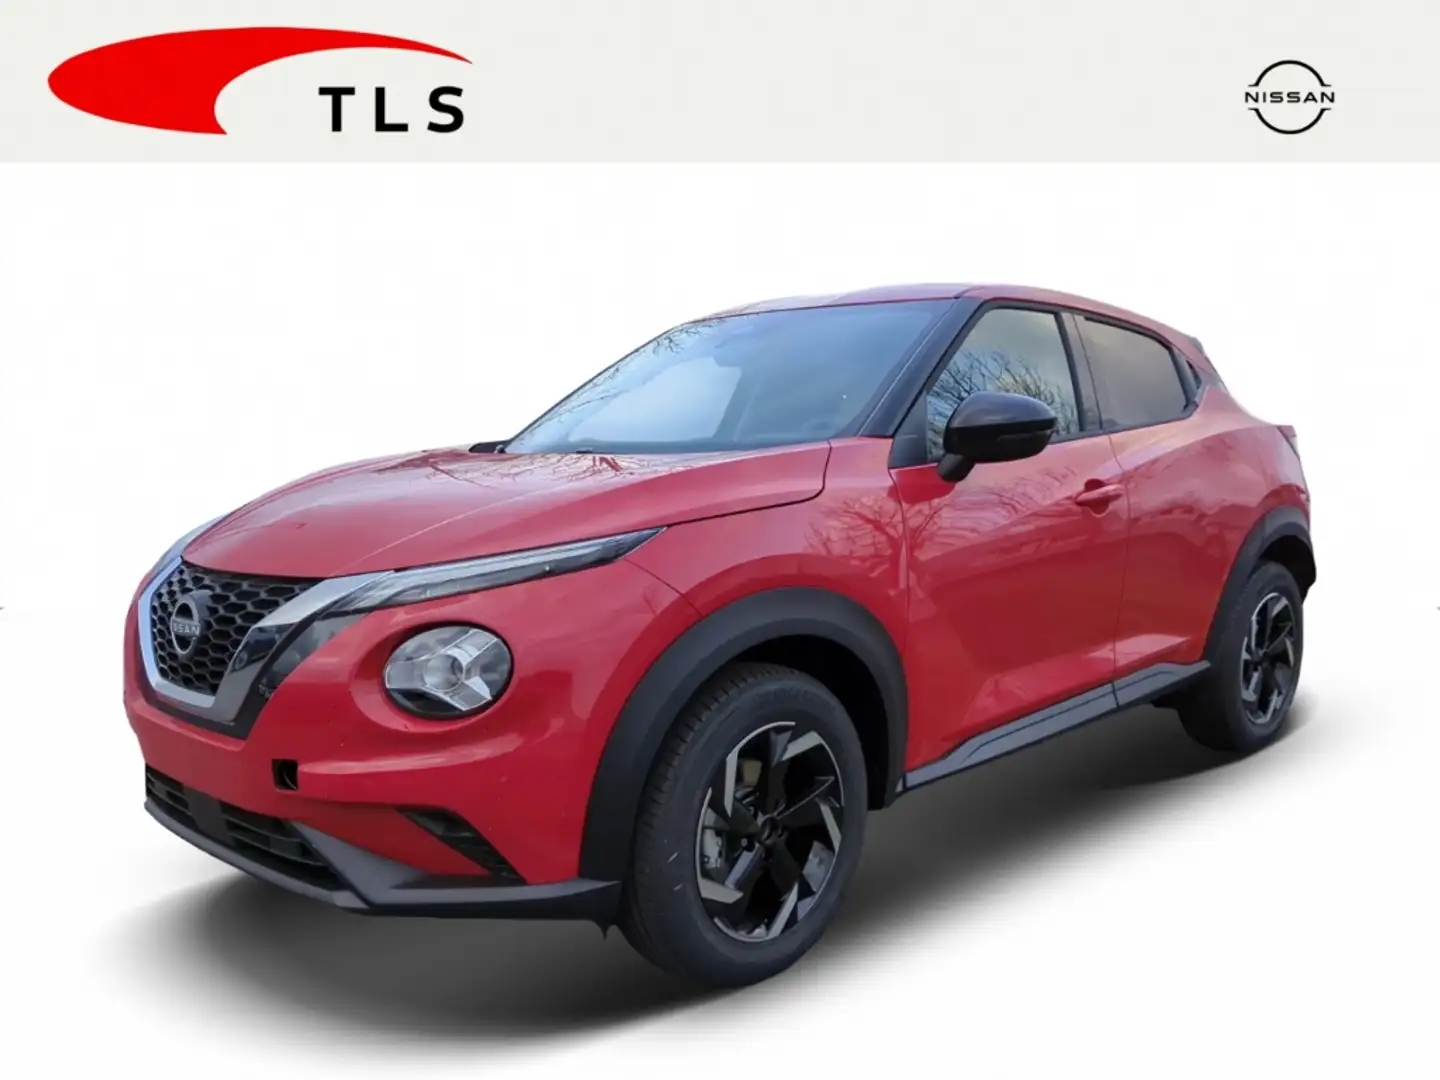 Nissan Juke N-STYLE - 1.0 DIG-T - 114PS - SOLID RED Rosso - 1